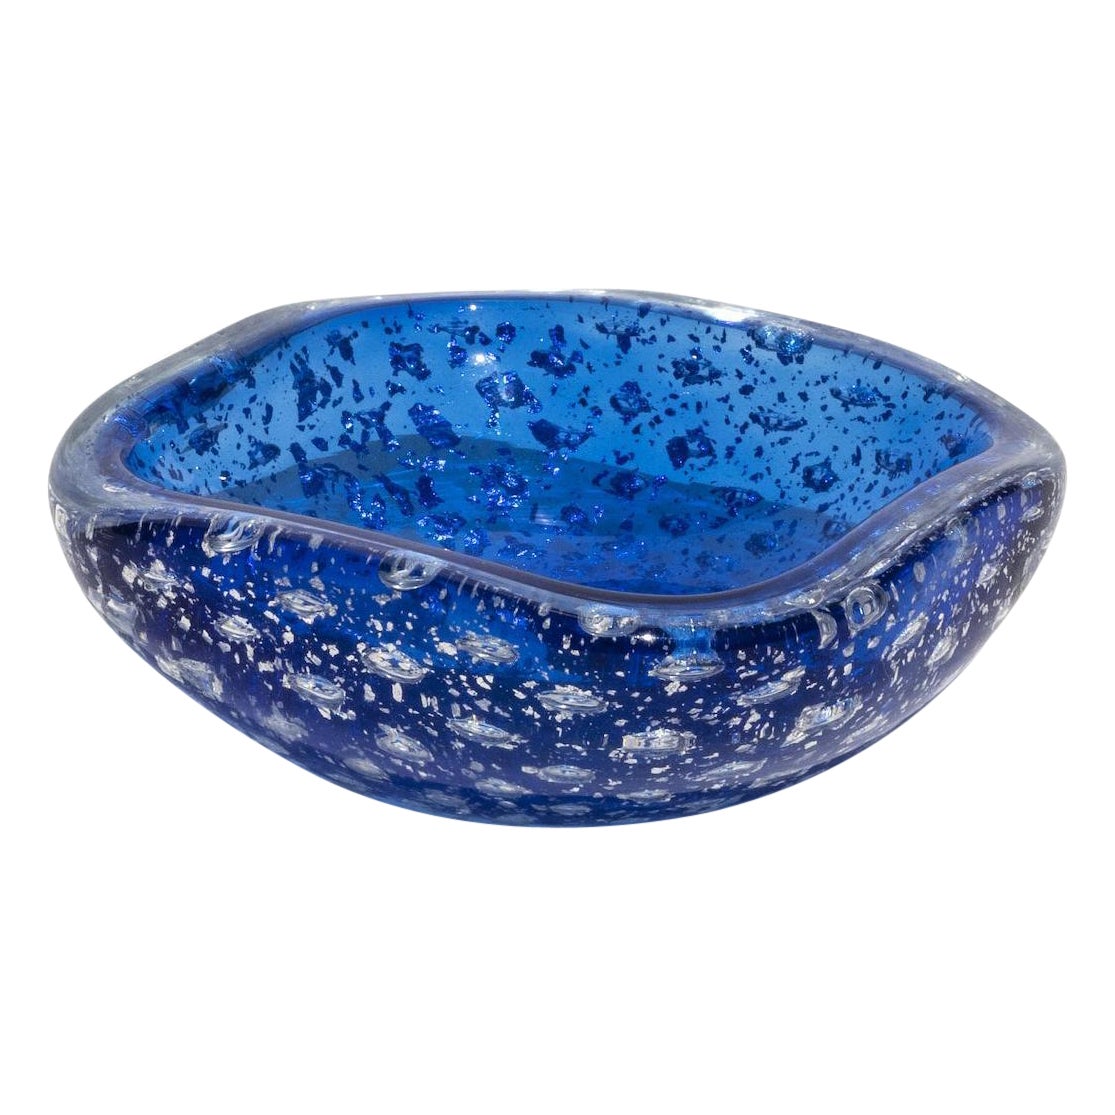 Vintage Italian Bowl from the 60s in Blue Murano Glass with Silver Metal Flakes